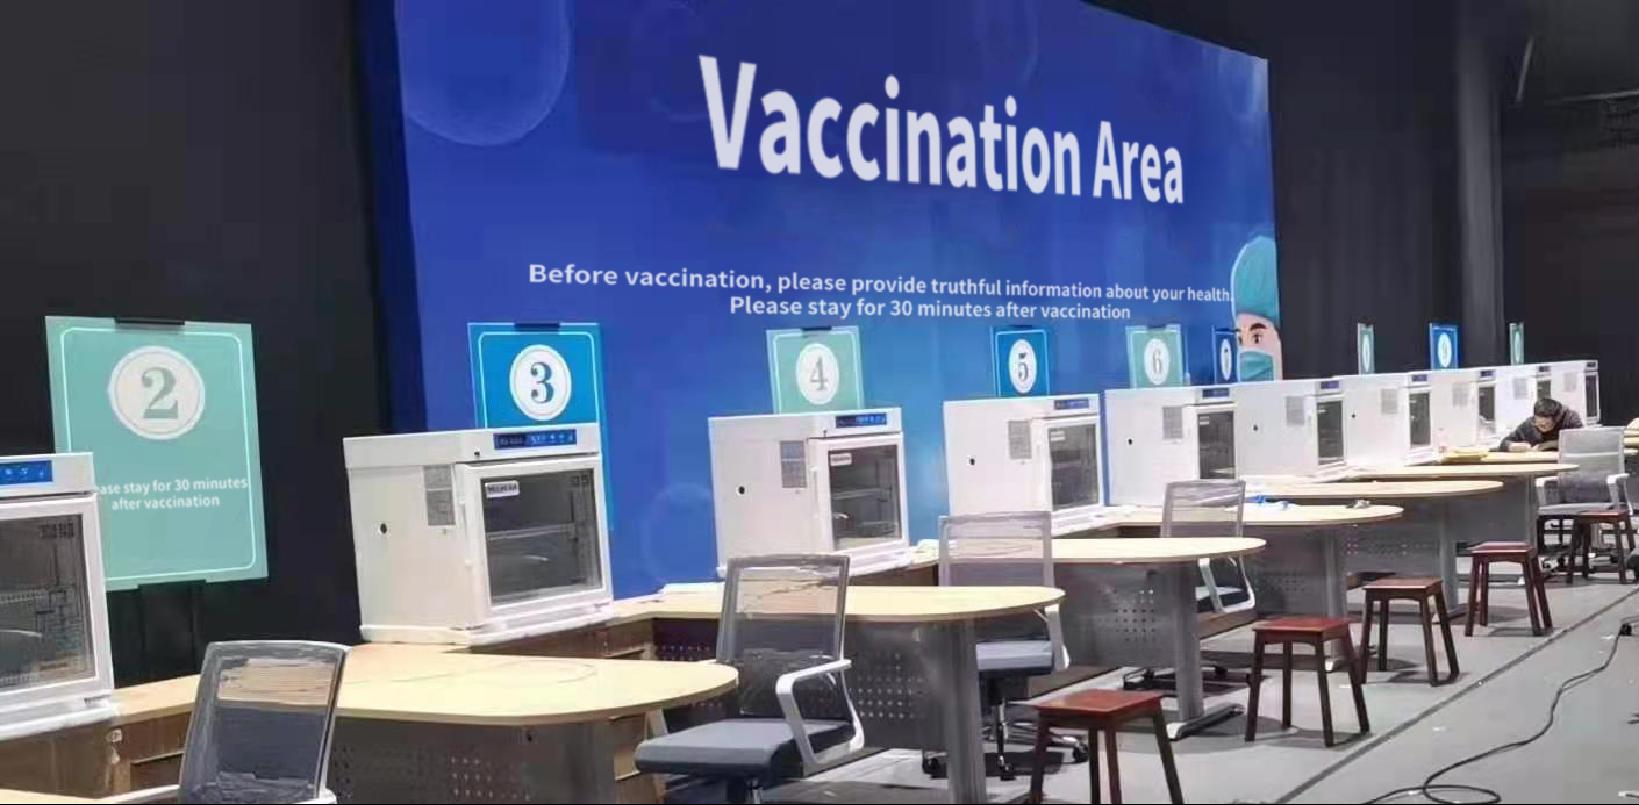 Meling Refrigerators And Freezers Being Used for Vaccine Storage Around The World